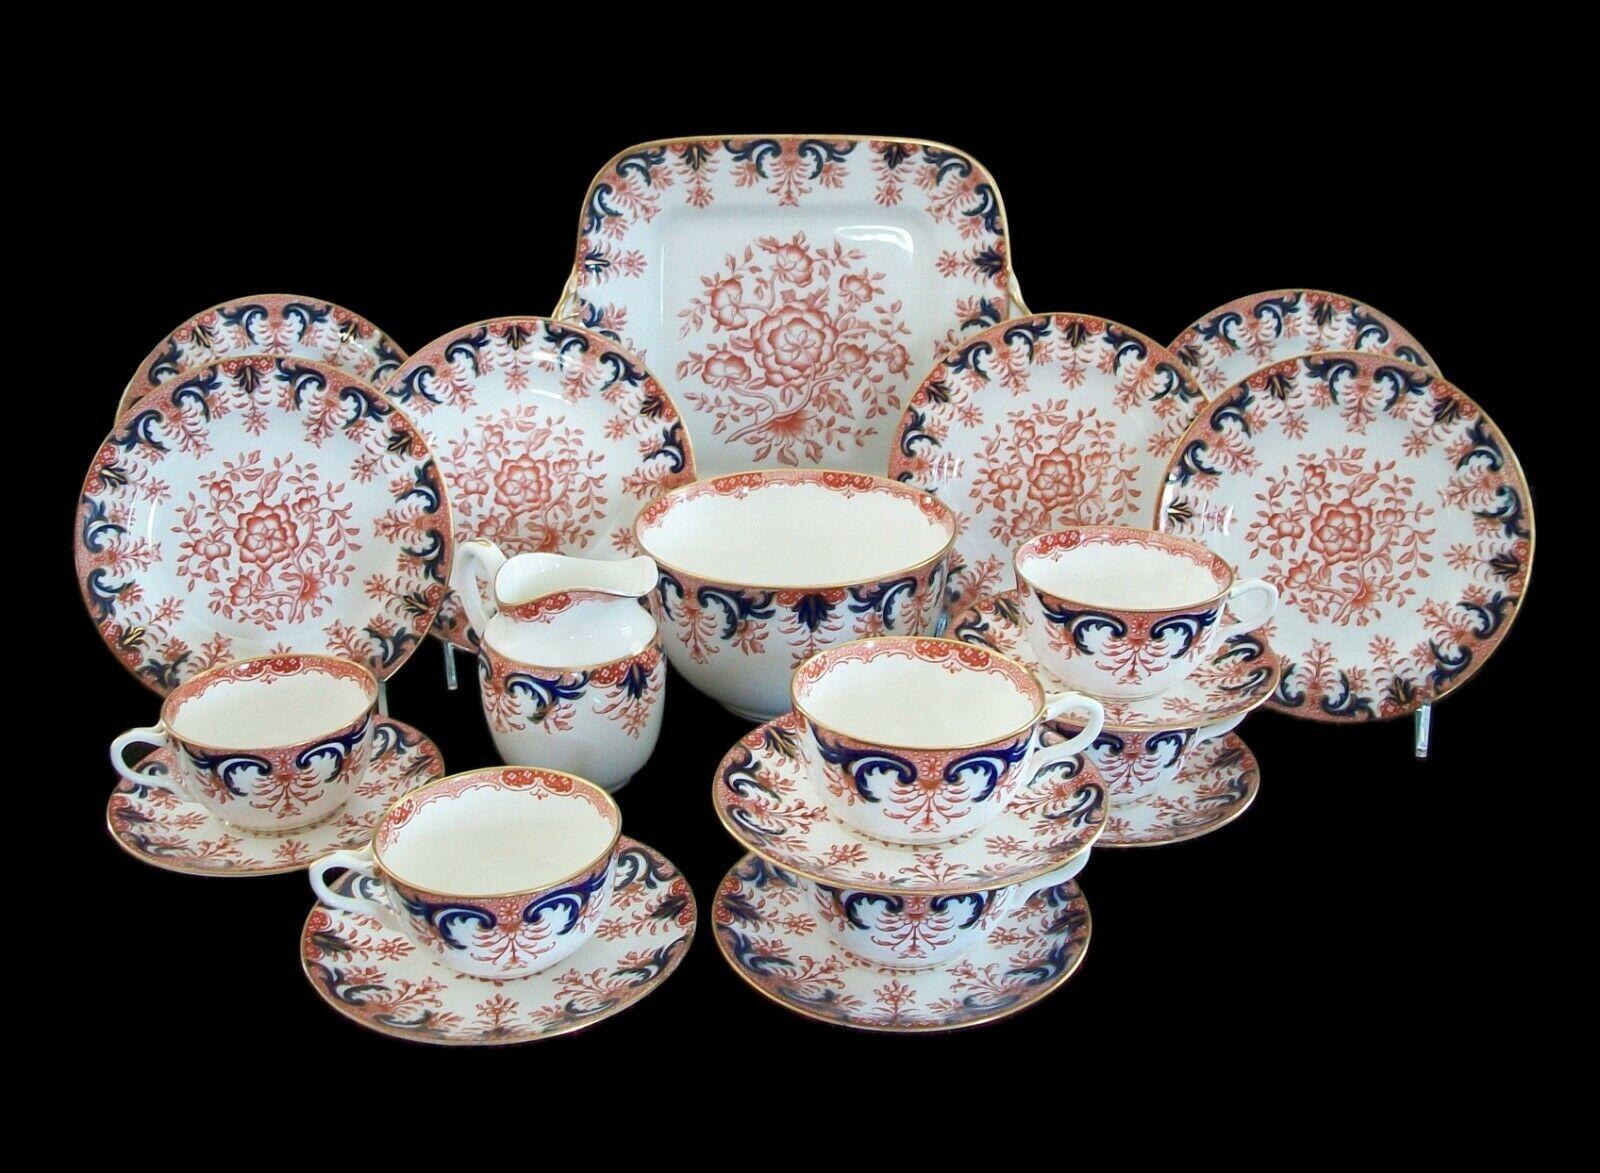 Wedgwood - exceptional and rare antique brick red transferware and flow blue luncheon set for six - hand painted gilded borders and details - consisting of a serving platter/tray, 6 tea cups and saucers, 6 luncheon plates, a creamer and slop bowl -